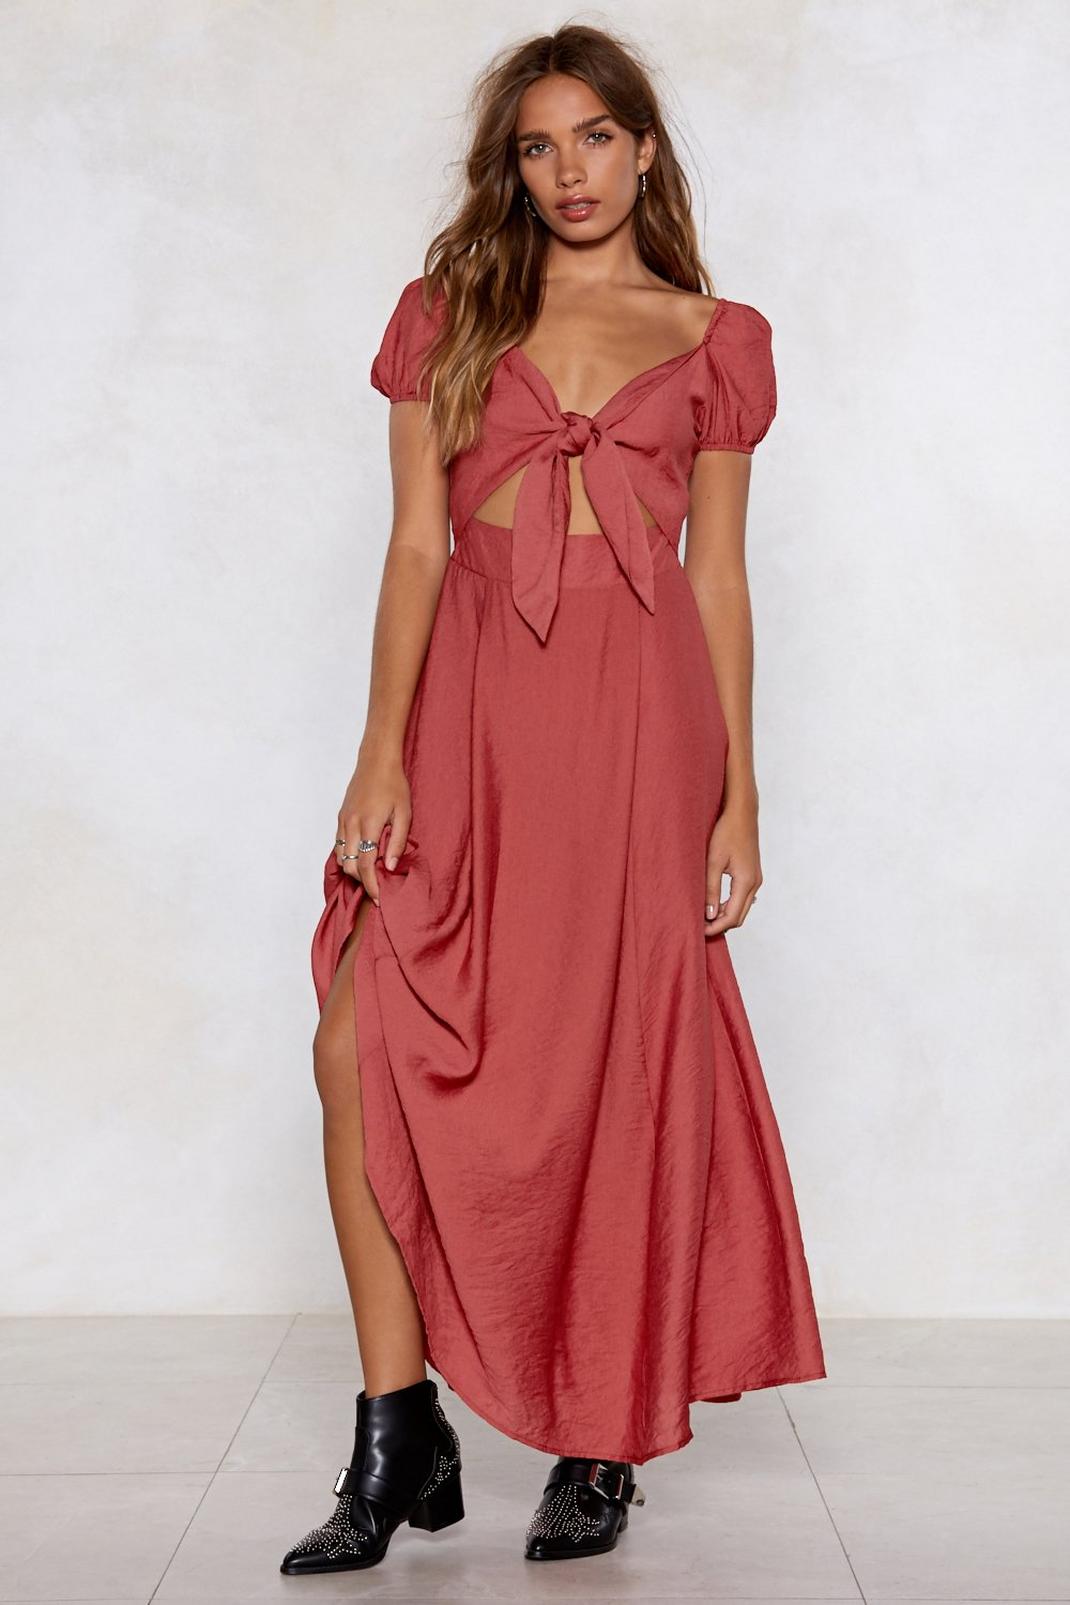 High and Tie Maxi Dress